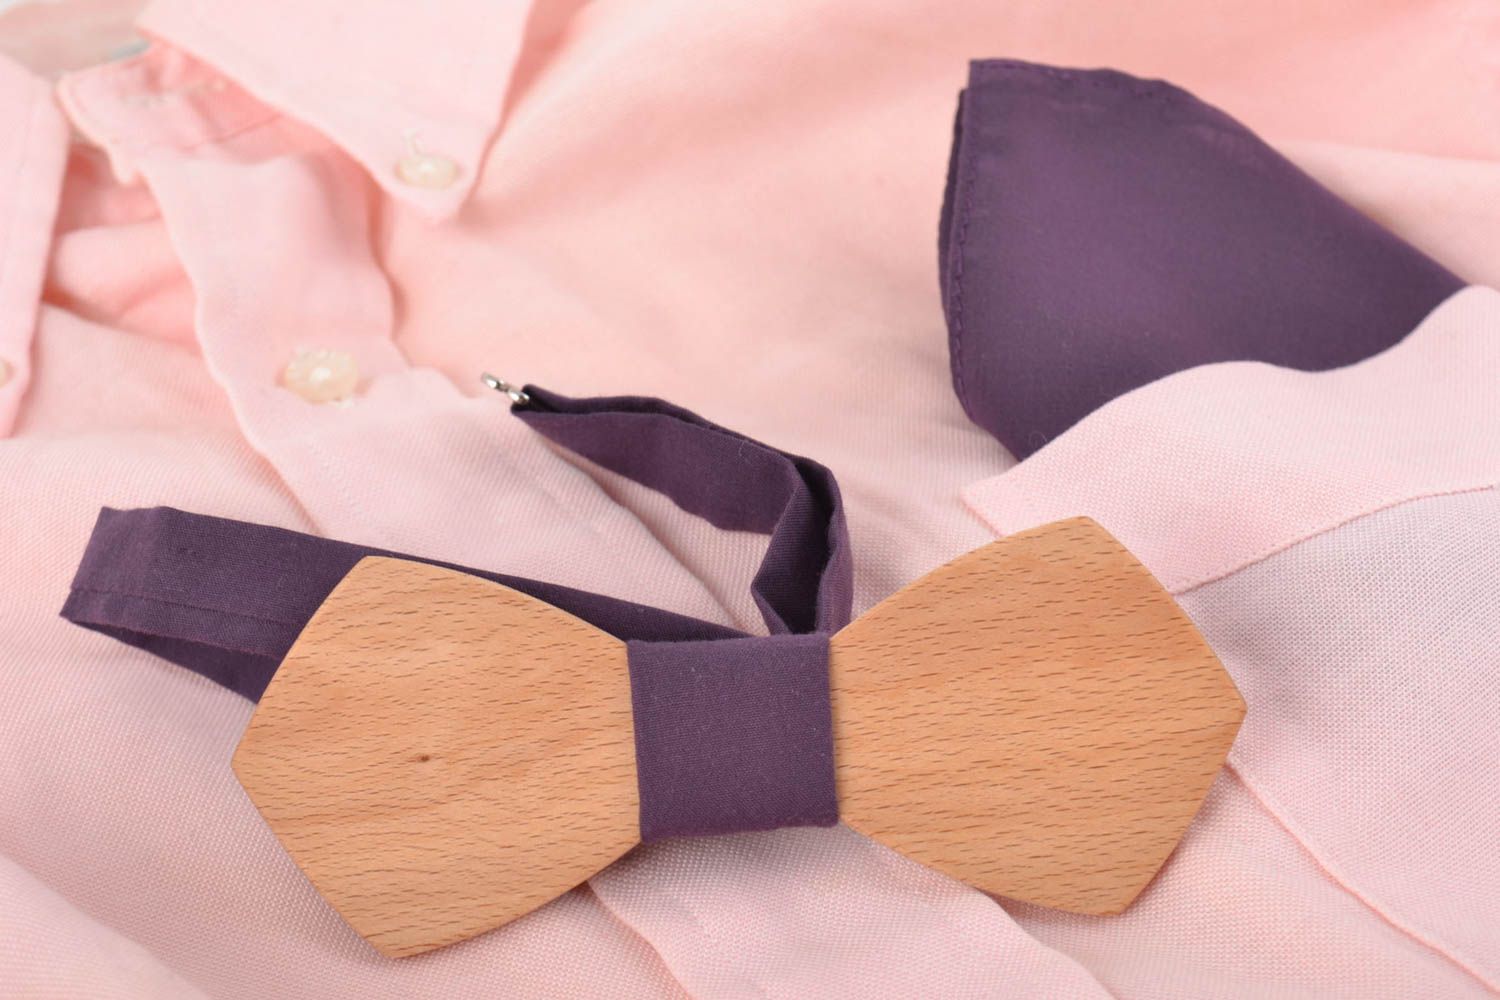 Beautiful handmade wooden bow tie cotton pocket square fashion trends gift ideas photo 1